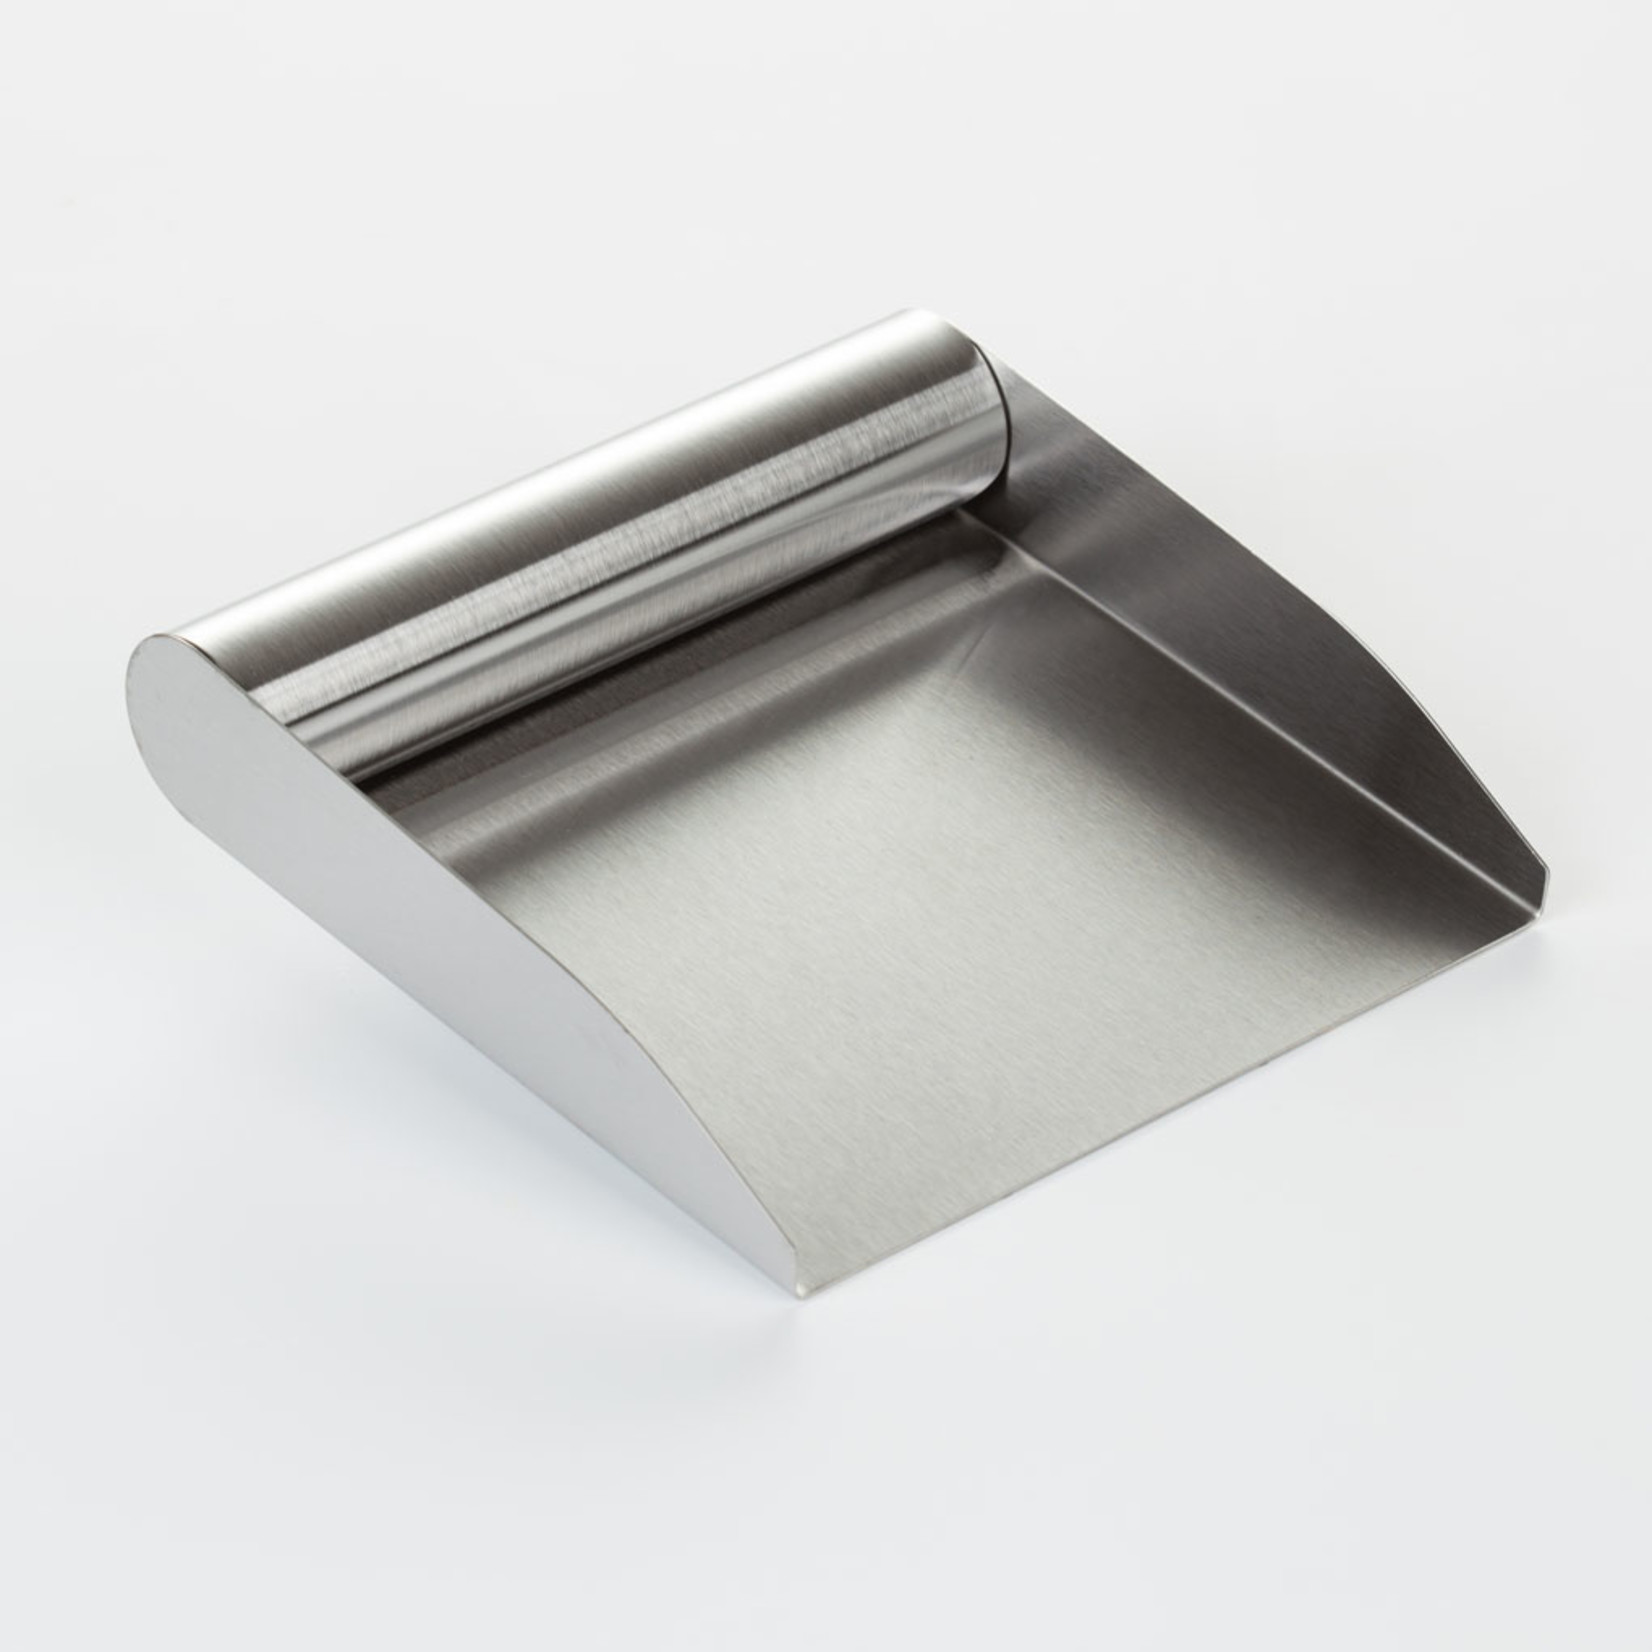 CHEF'S PLANET PrepTaxi Food Scoop - Stainless